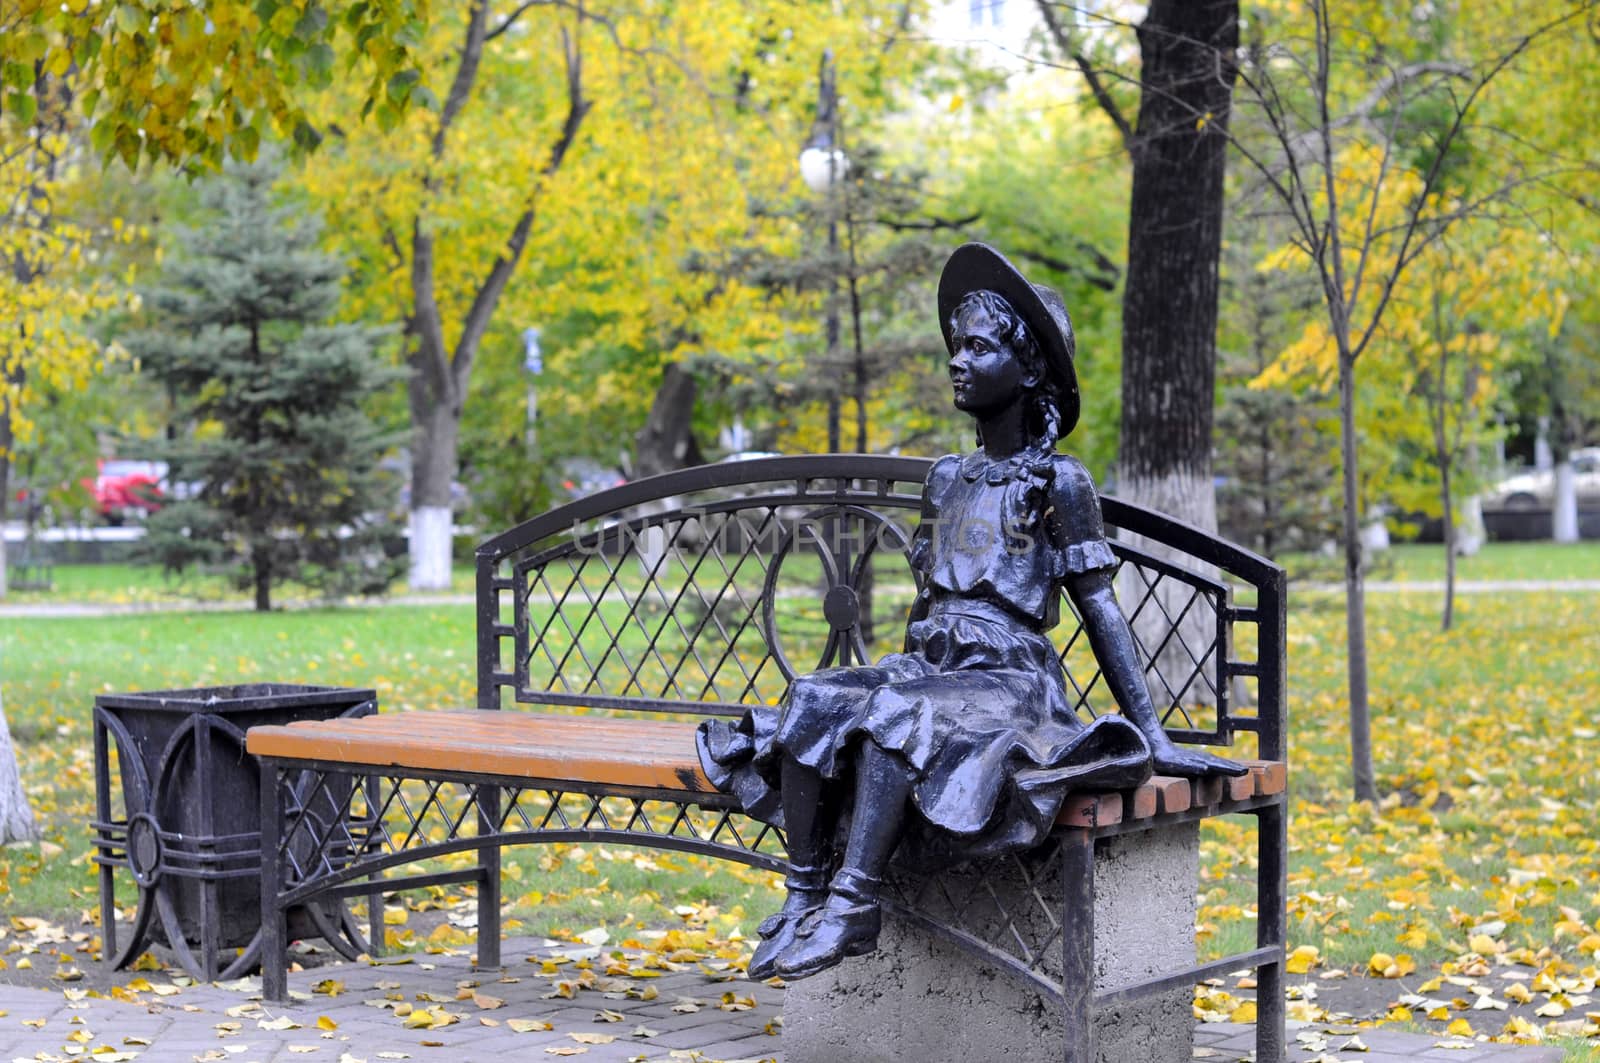 The girl's sculpture on a bench in Aleksandrovsk to a garden, Ty by veronka72